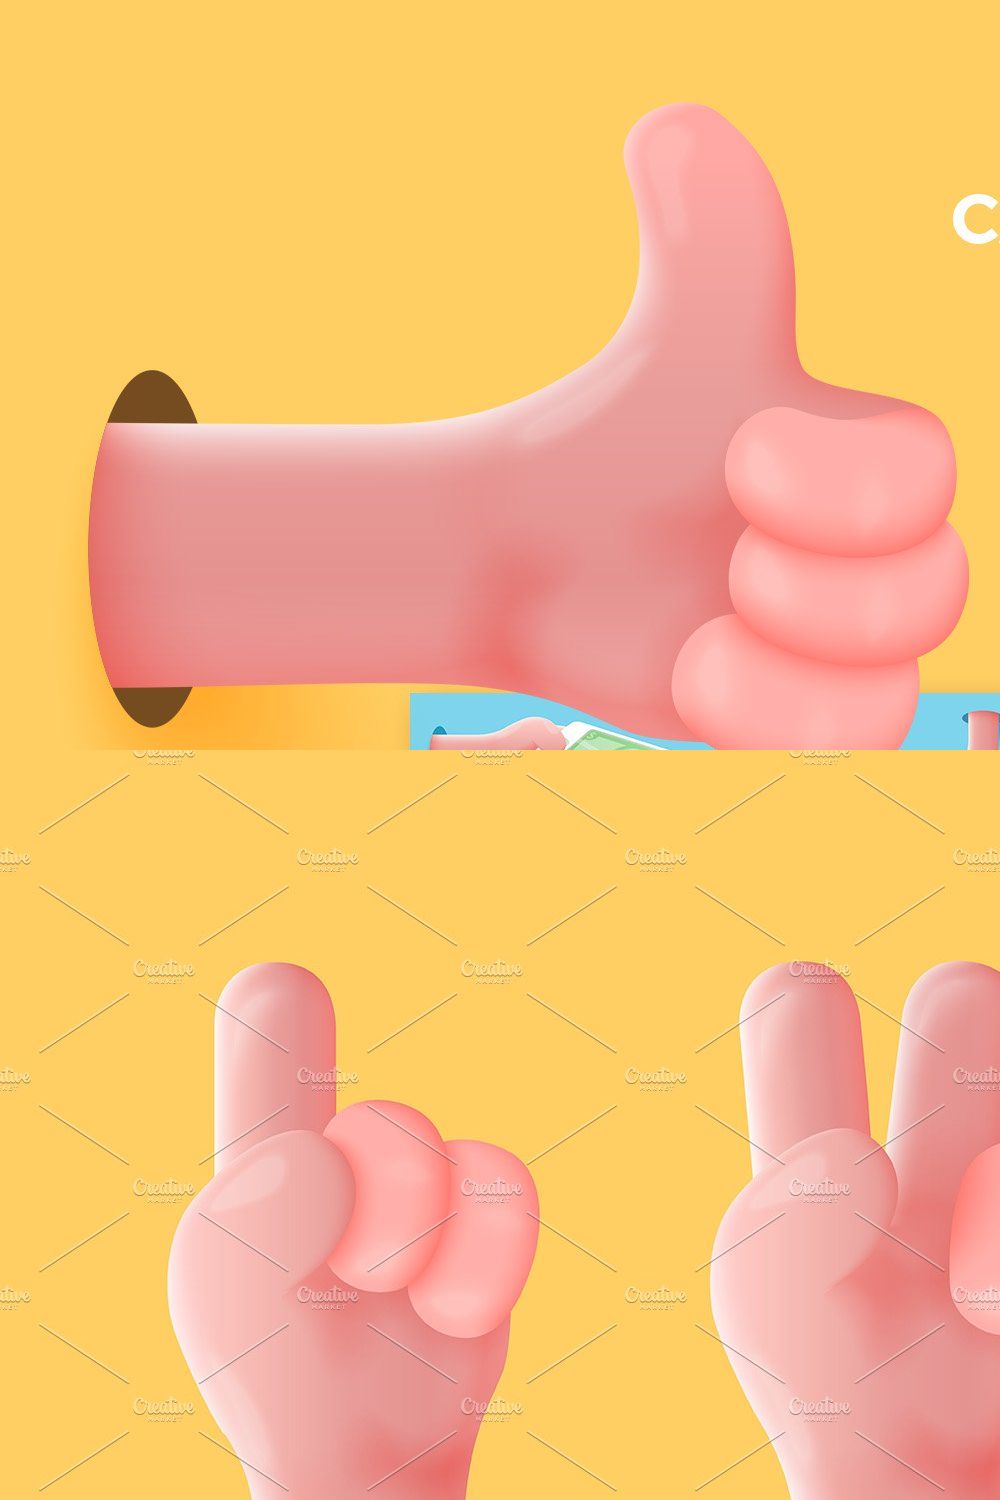 Phone and Dollar cartoon hands set pinterest preview image.